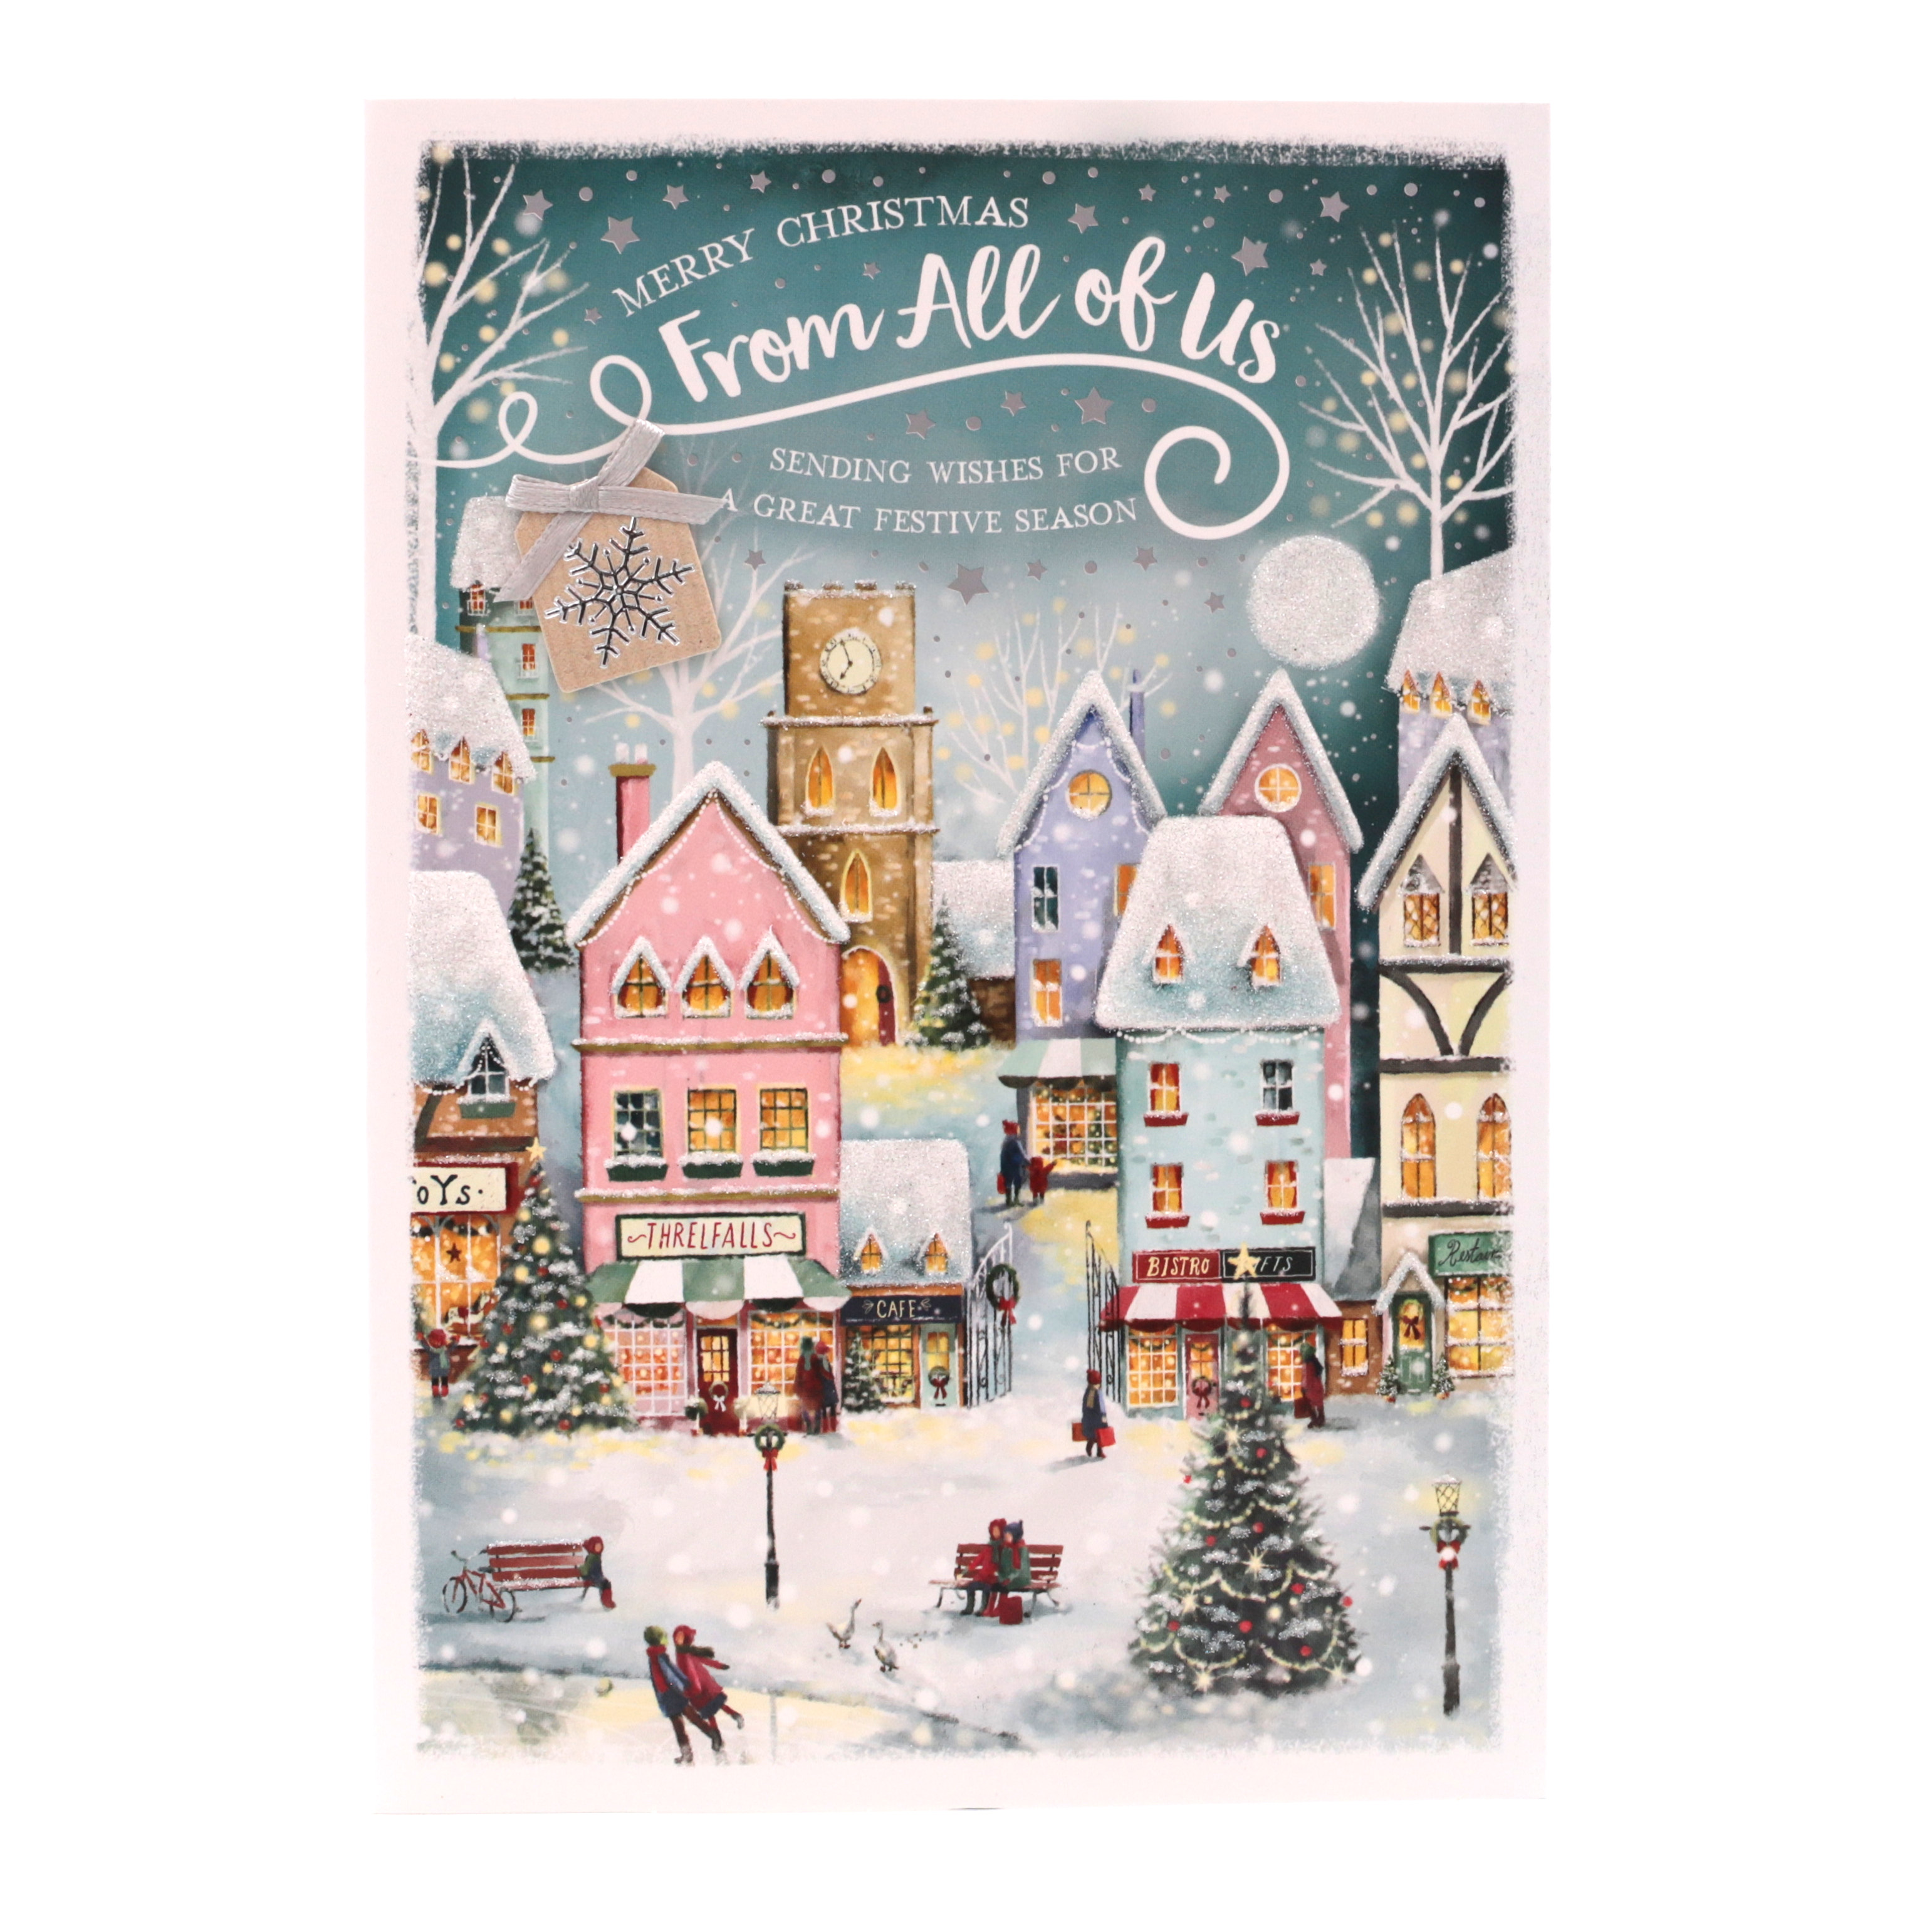 Christmas Card - From All Of Us, Snowy Street Scene